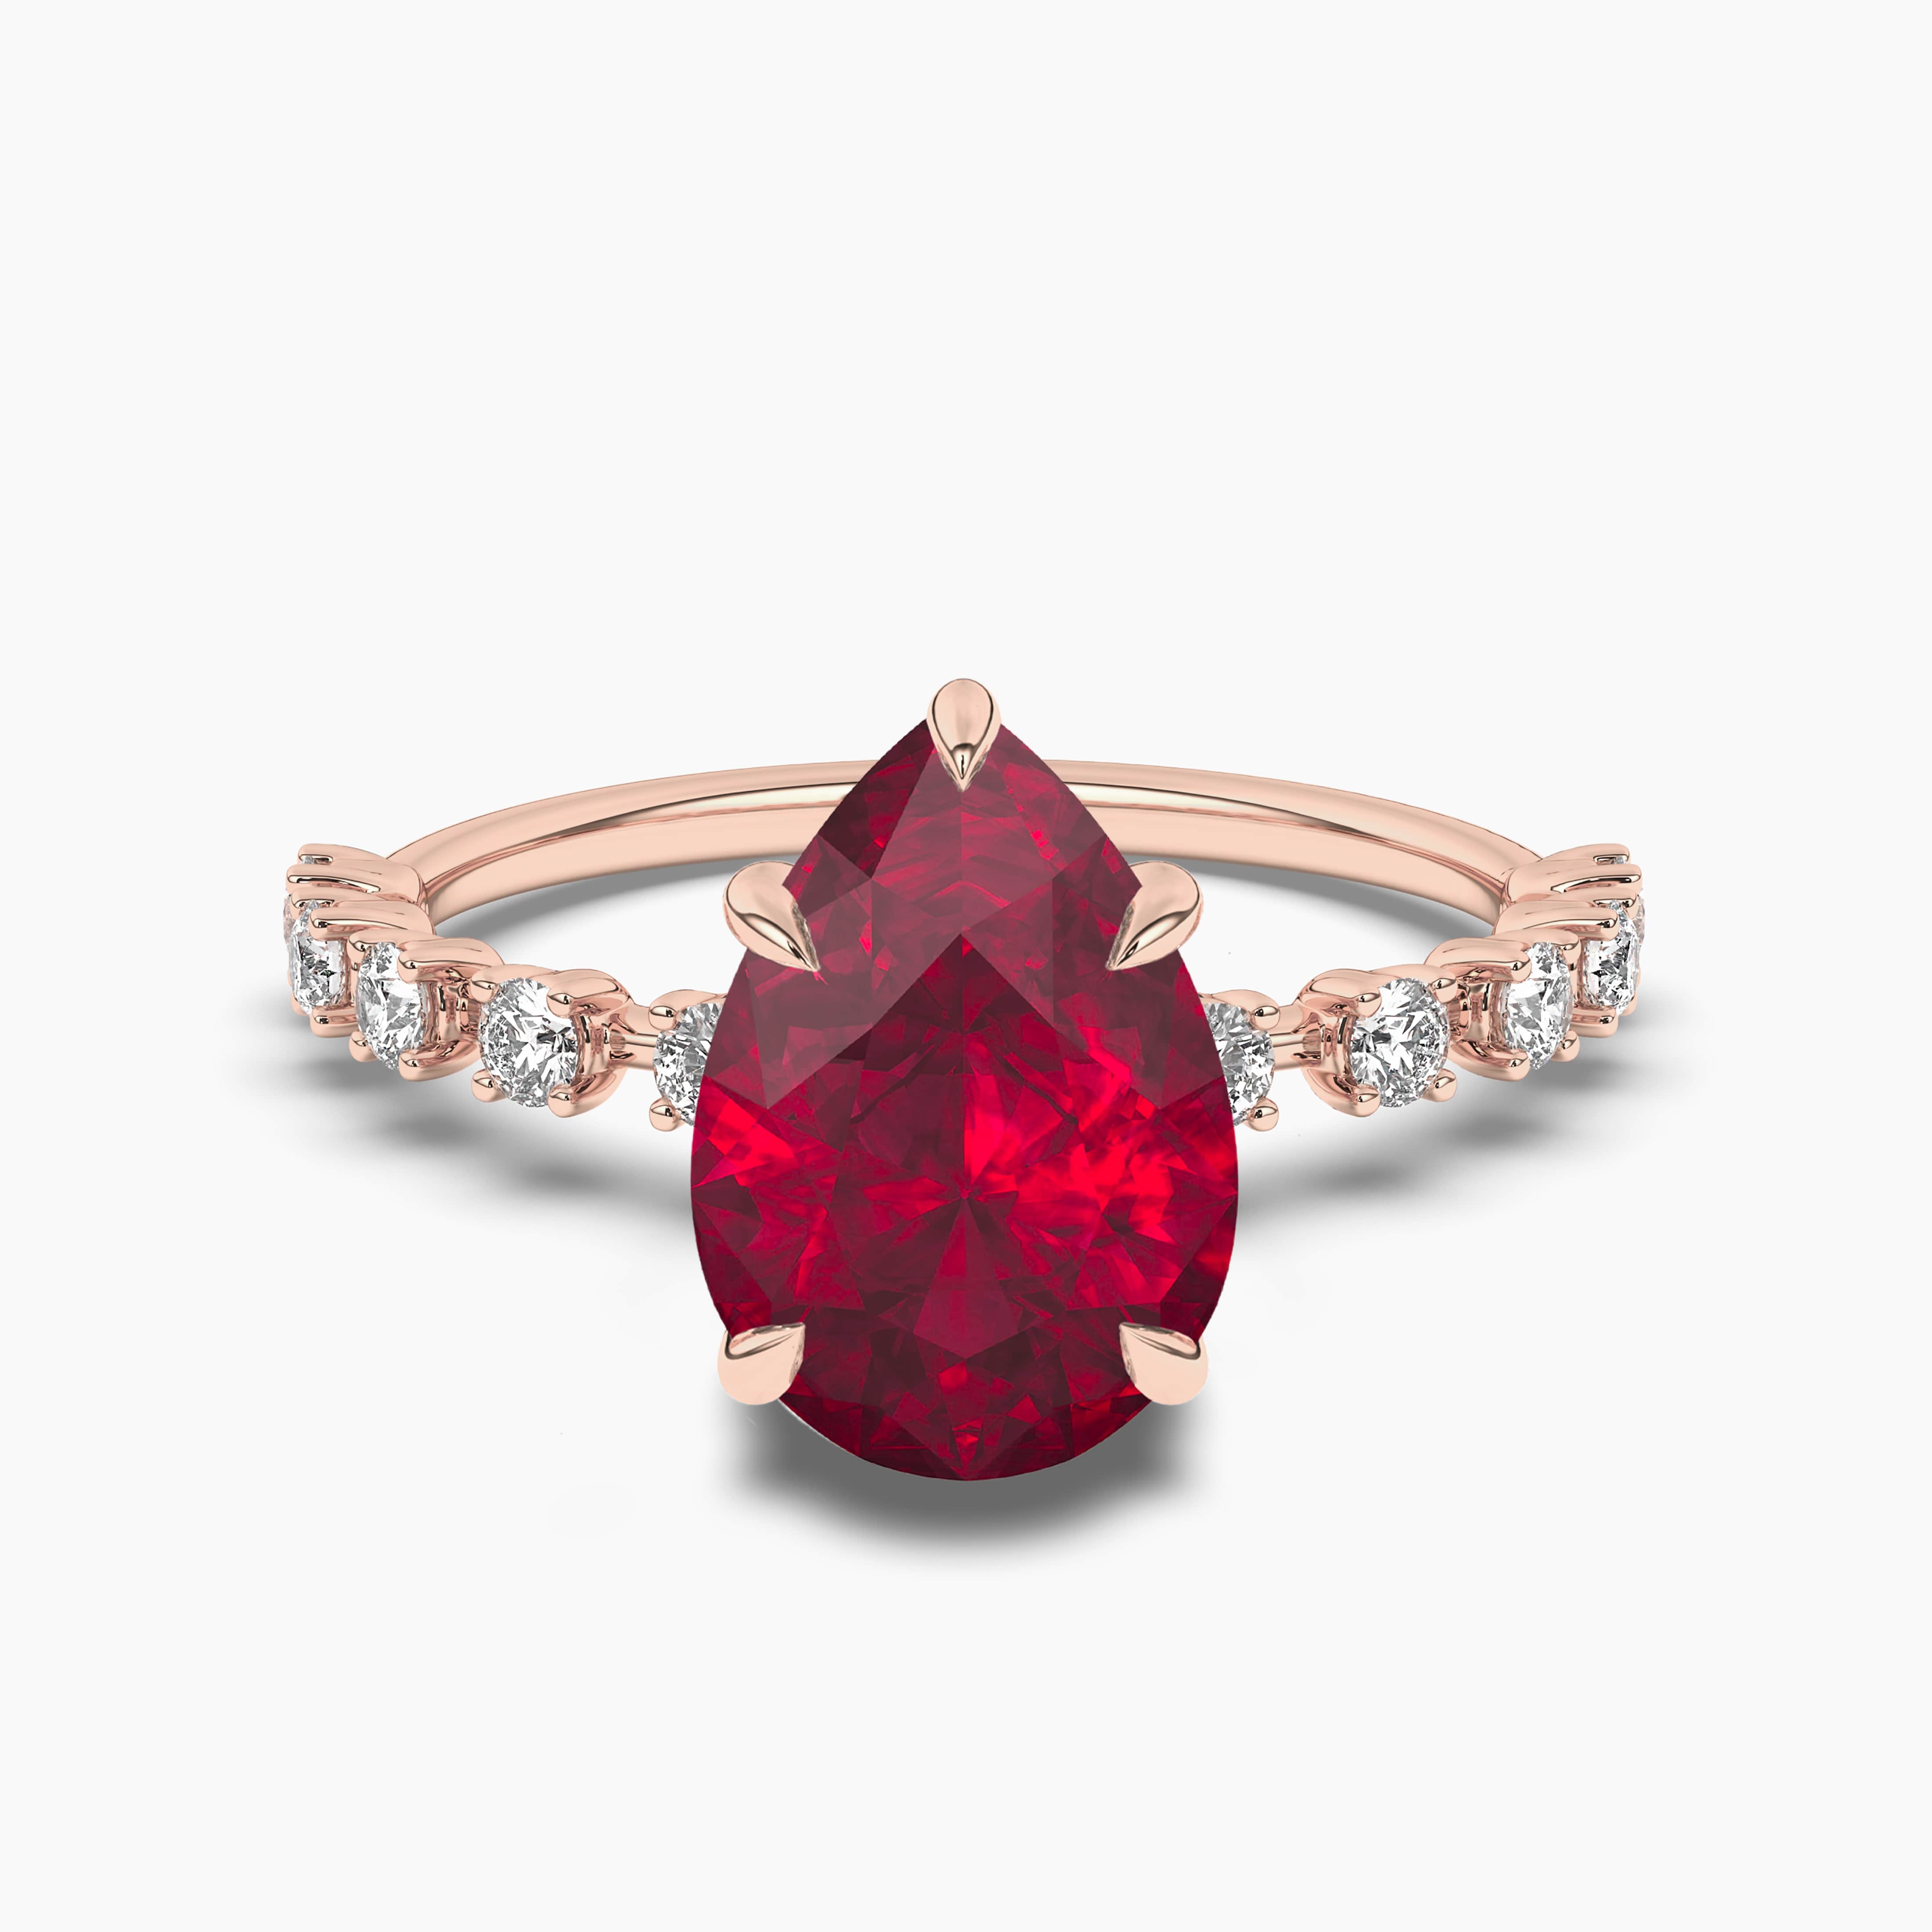 Pear Shape Ruby Ring with Diamonds